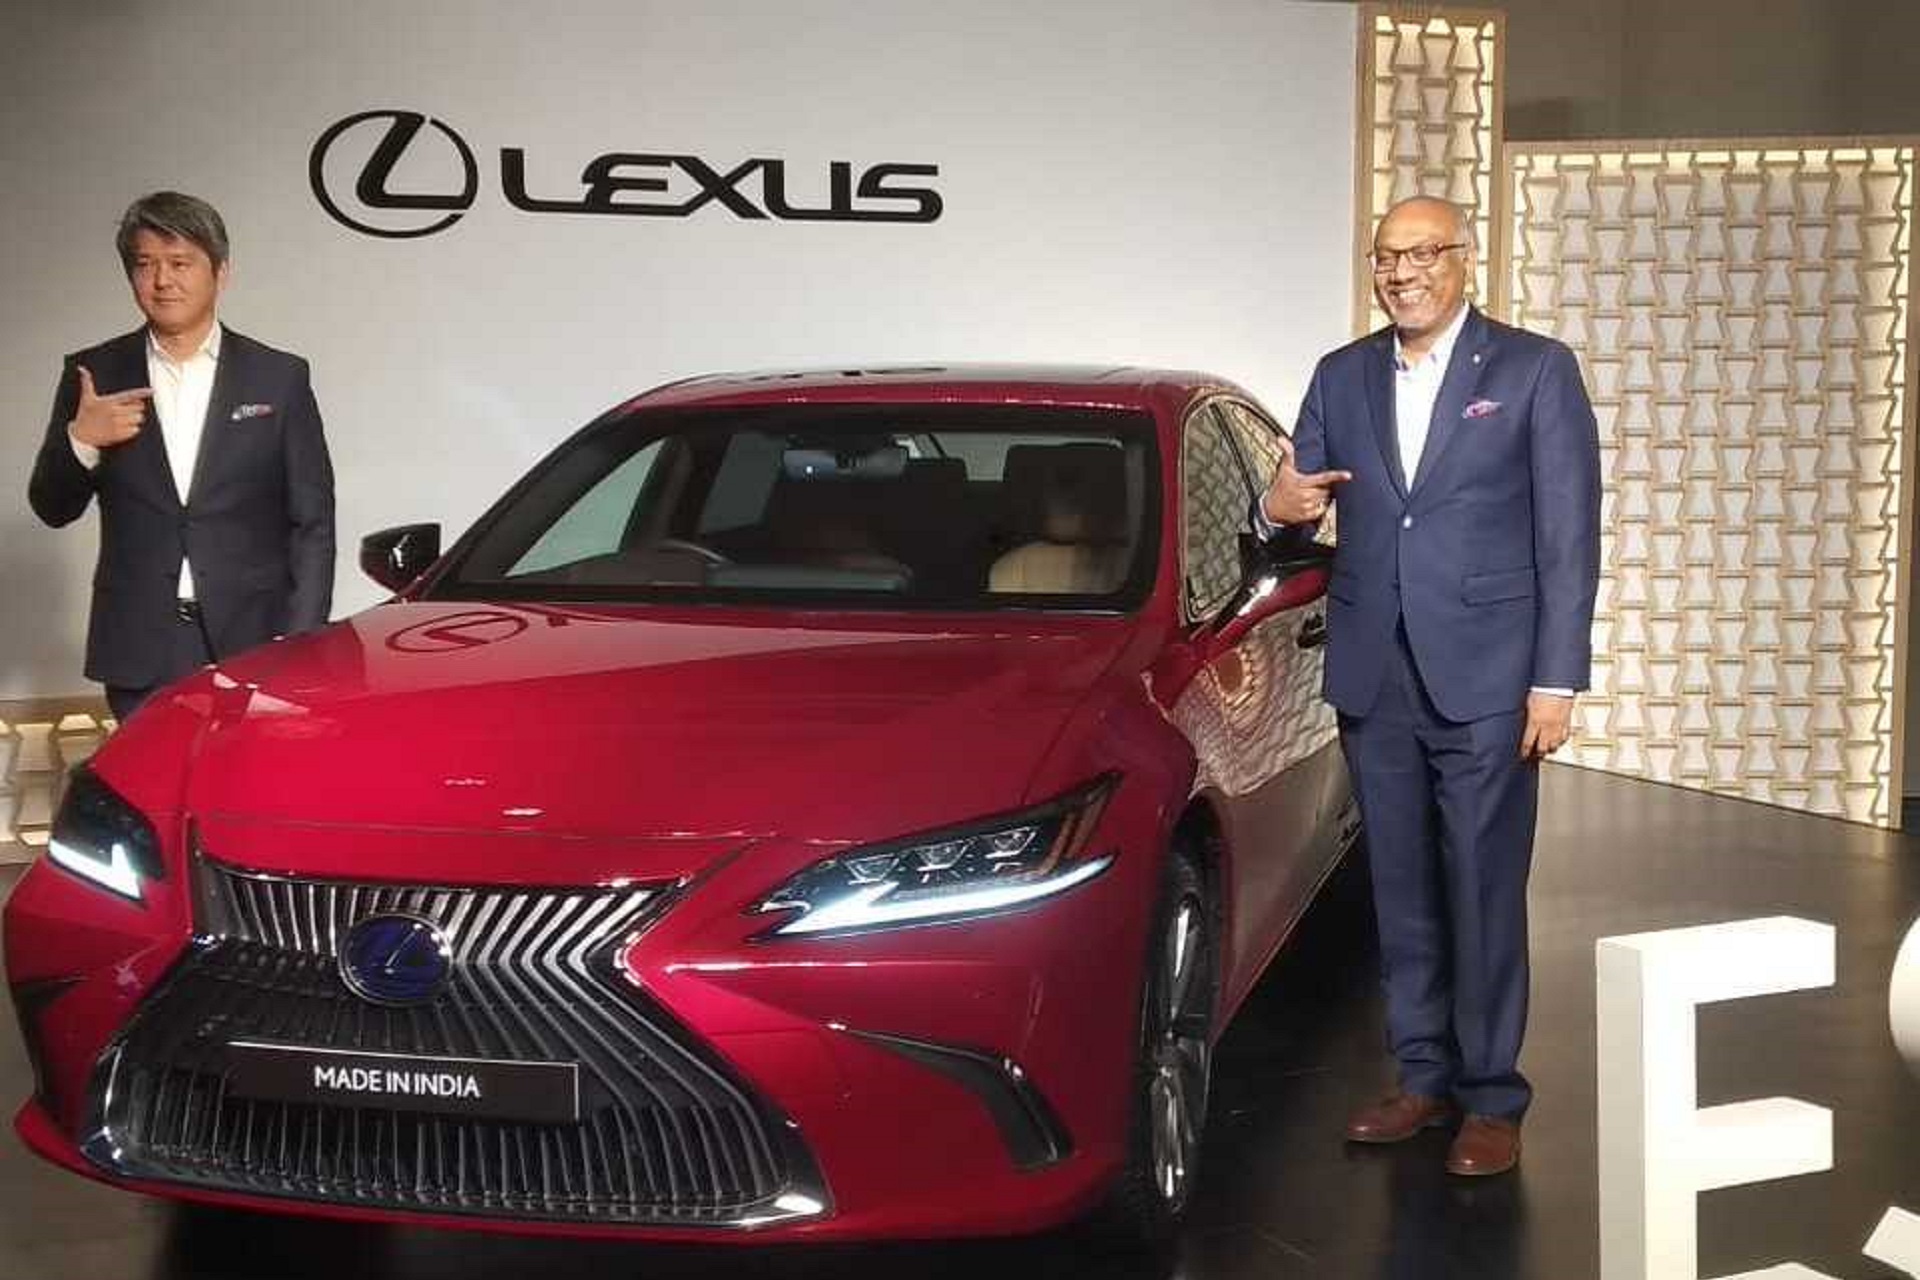 Lexus Evaluating The Right Time To Launch An EV After Introducing 'Made In India' ES 300H